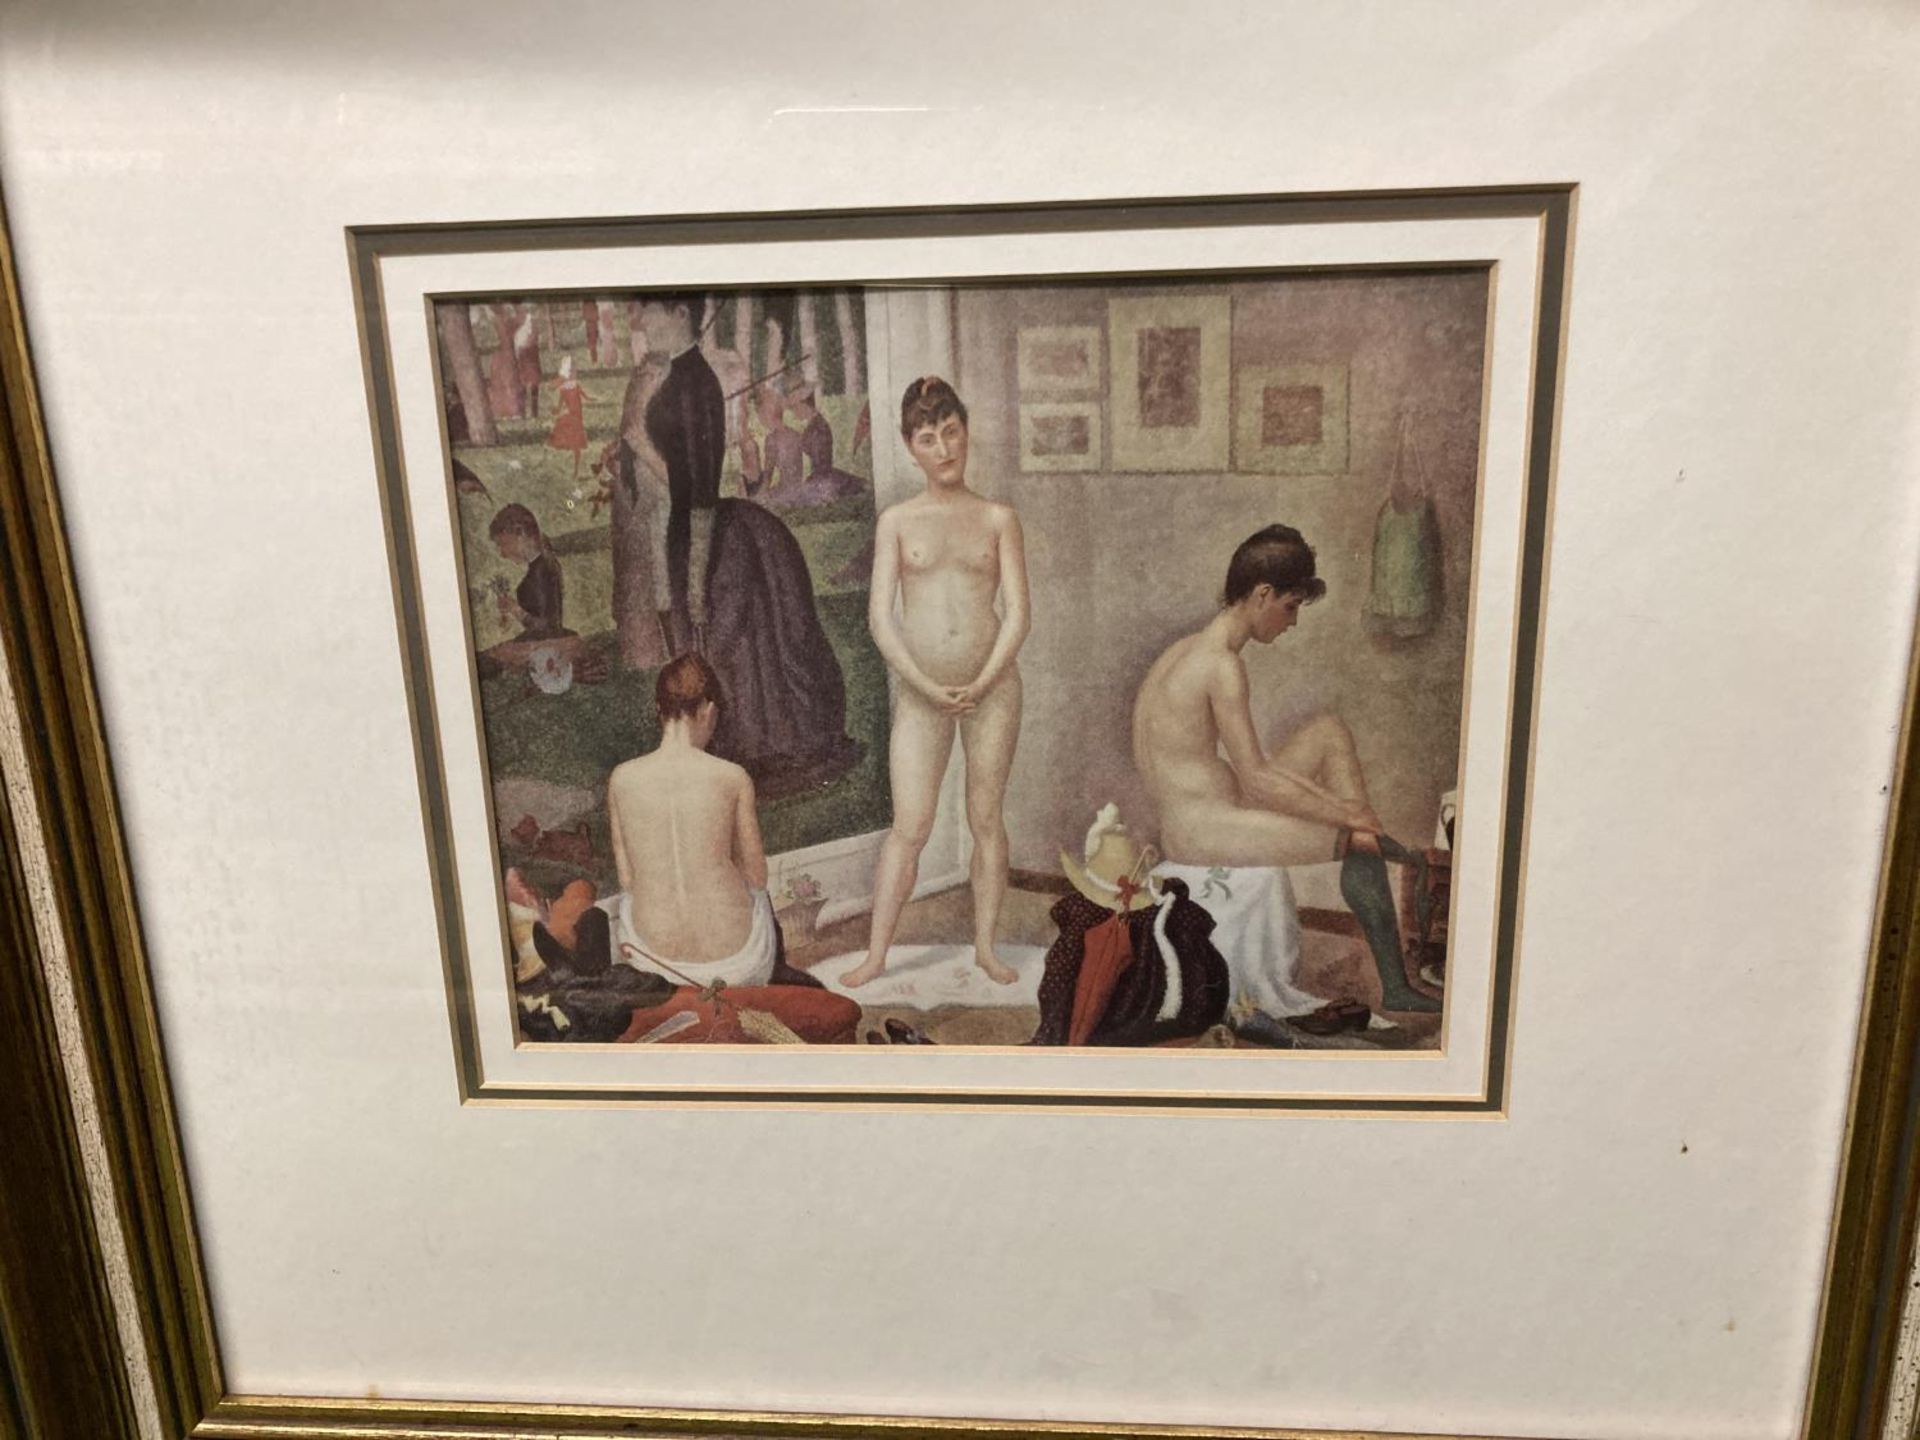 TWO FRAMED VINTAGE PRINTS, ONE ENTITLED 'LES POSEUSES' THE OTHER A CLASSICAL PRINT